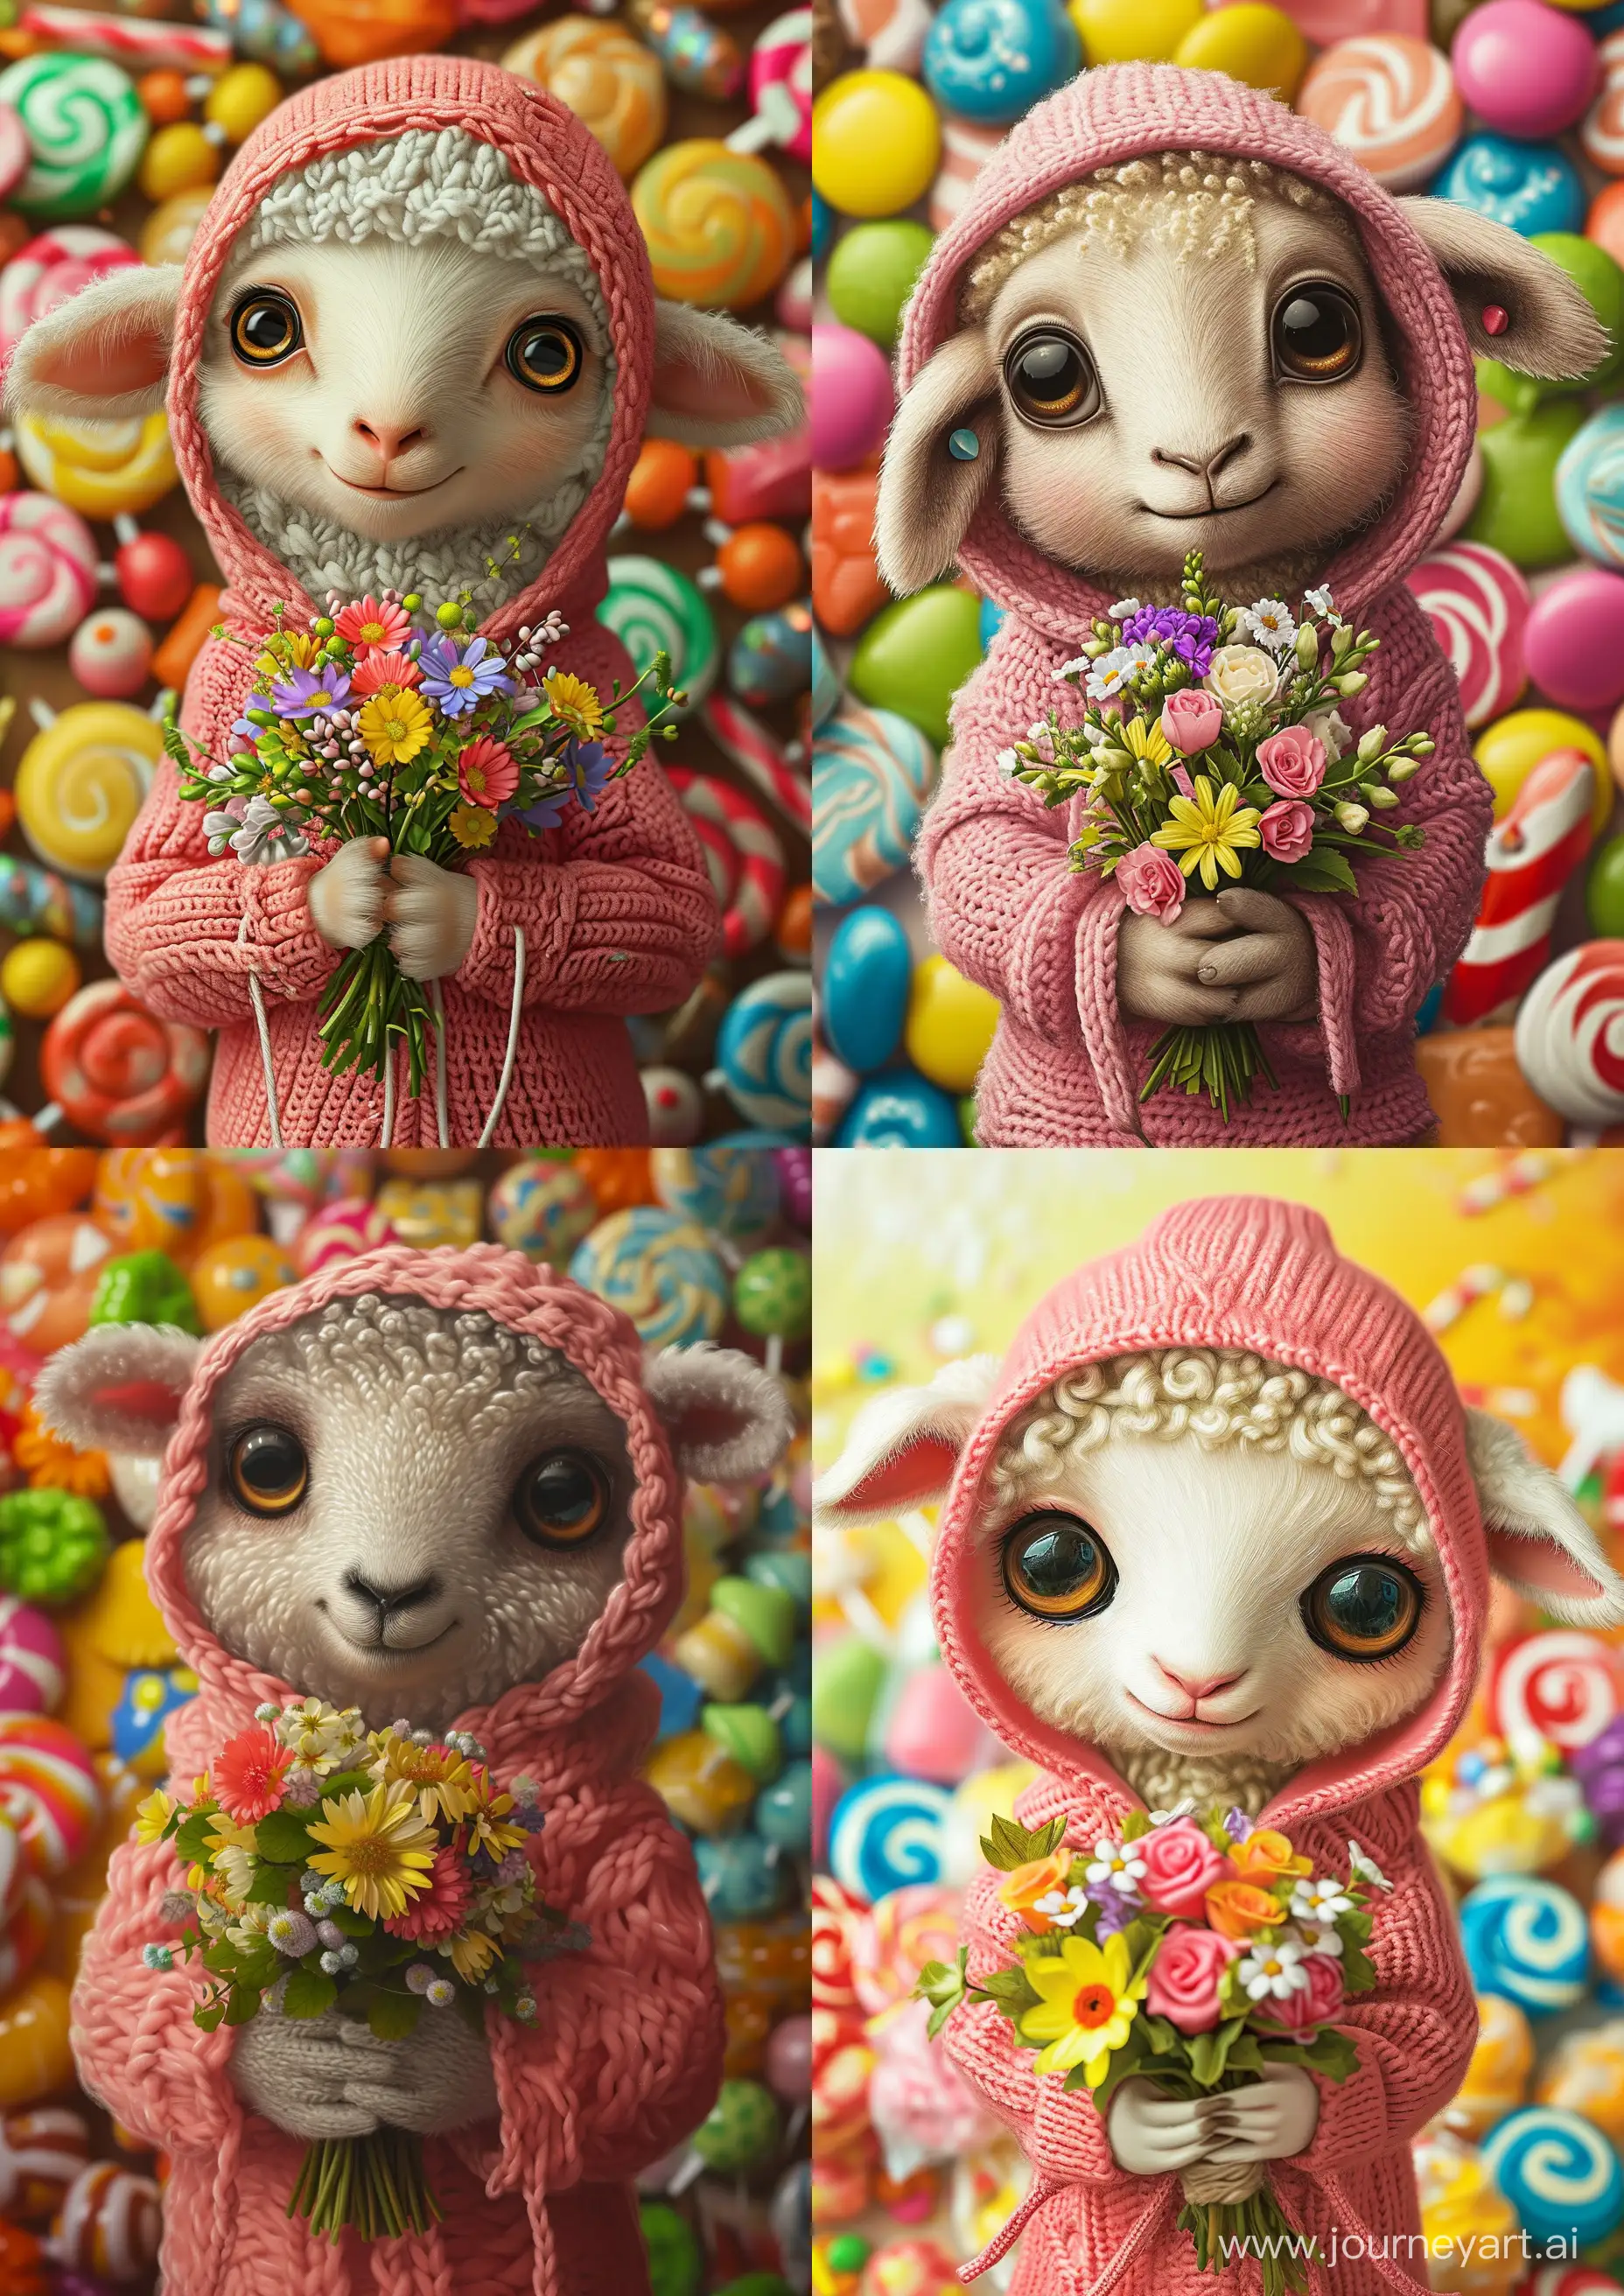 Sweet-Little-Sheep-with-Flower-Bouquet-in-Knitted-Pink-Hoodie